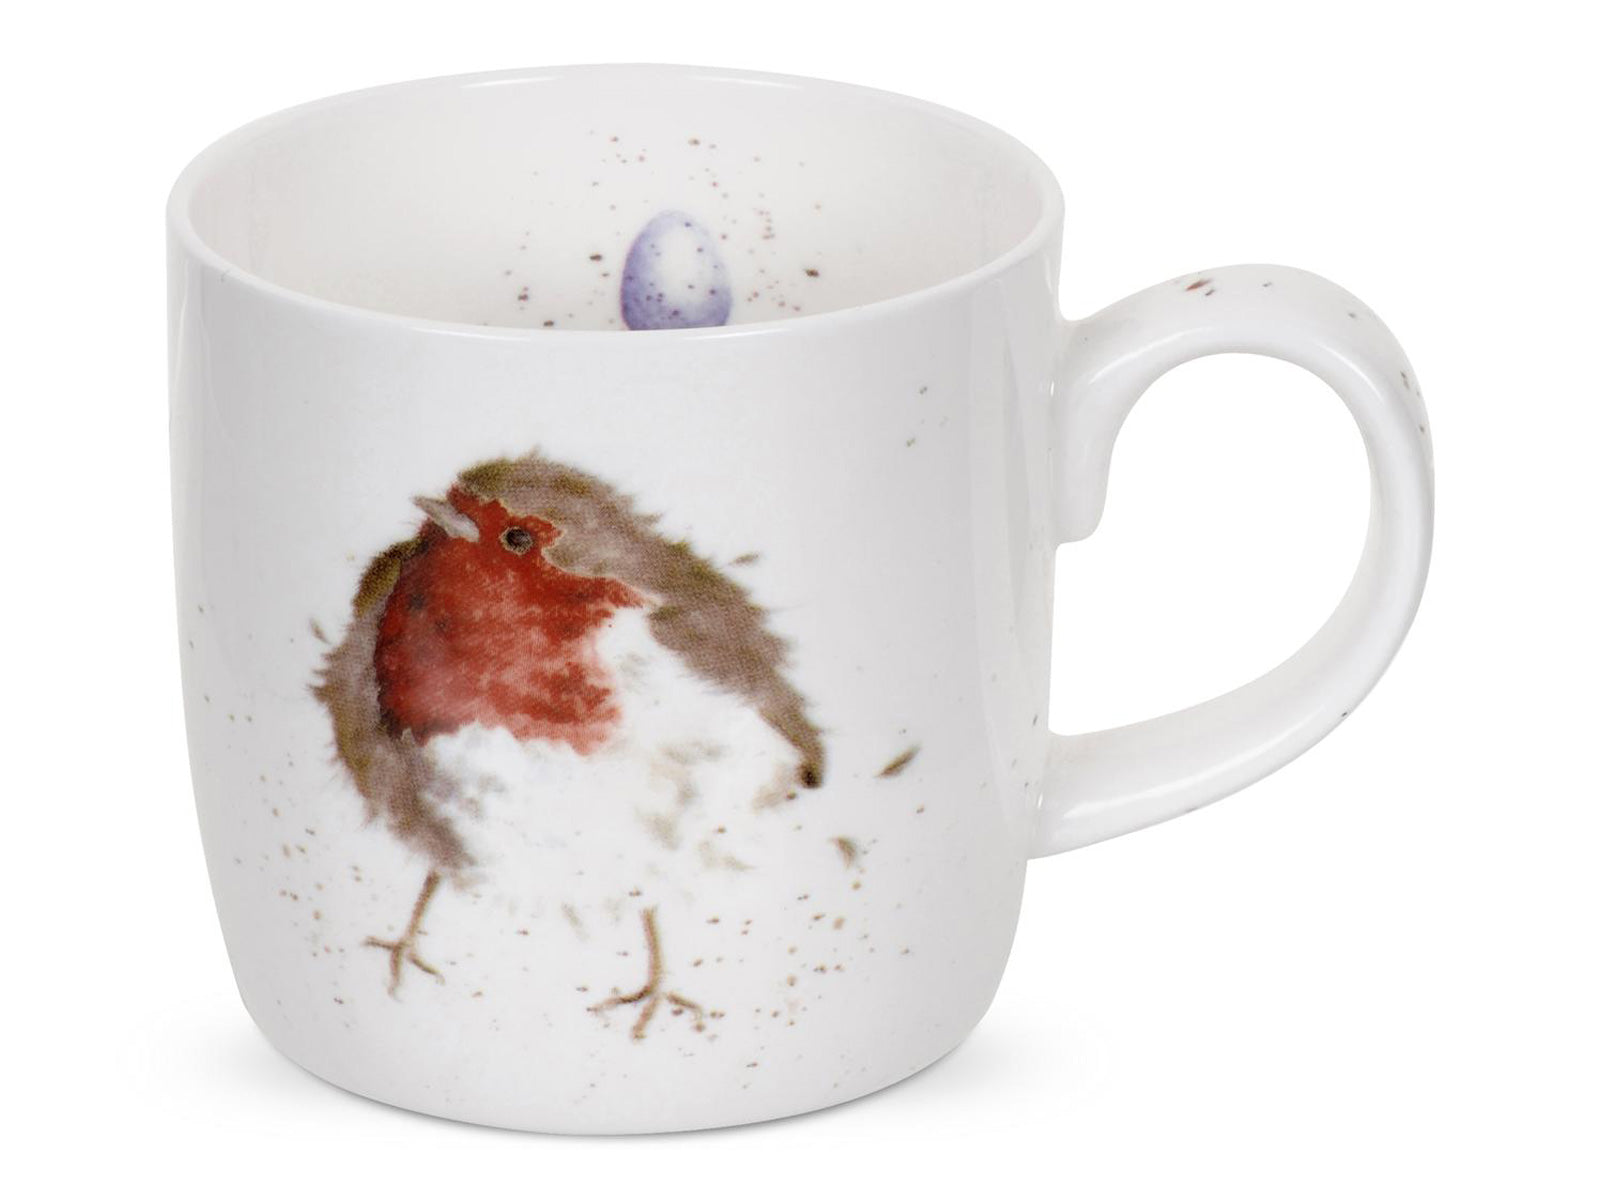 This Robin Mug is stunning, with its vibrant reds and intricate detail, this makes for a gorgeous illustration, a perfect Mug for Christmas. Size: 0.31L - 11fl.oz. By: Wrendale. Product Code: MMLK5629-XT.